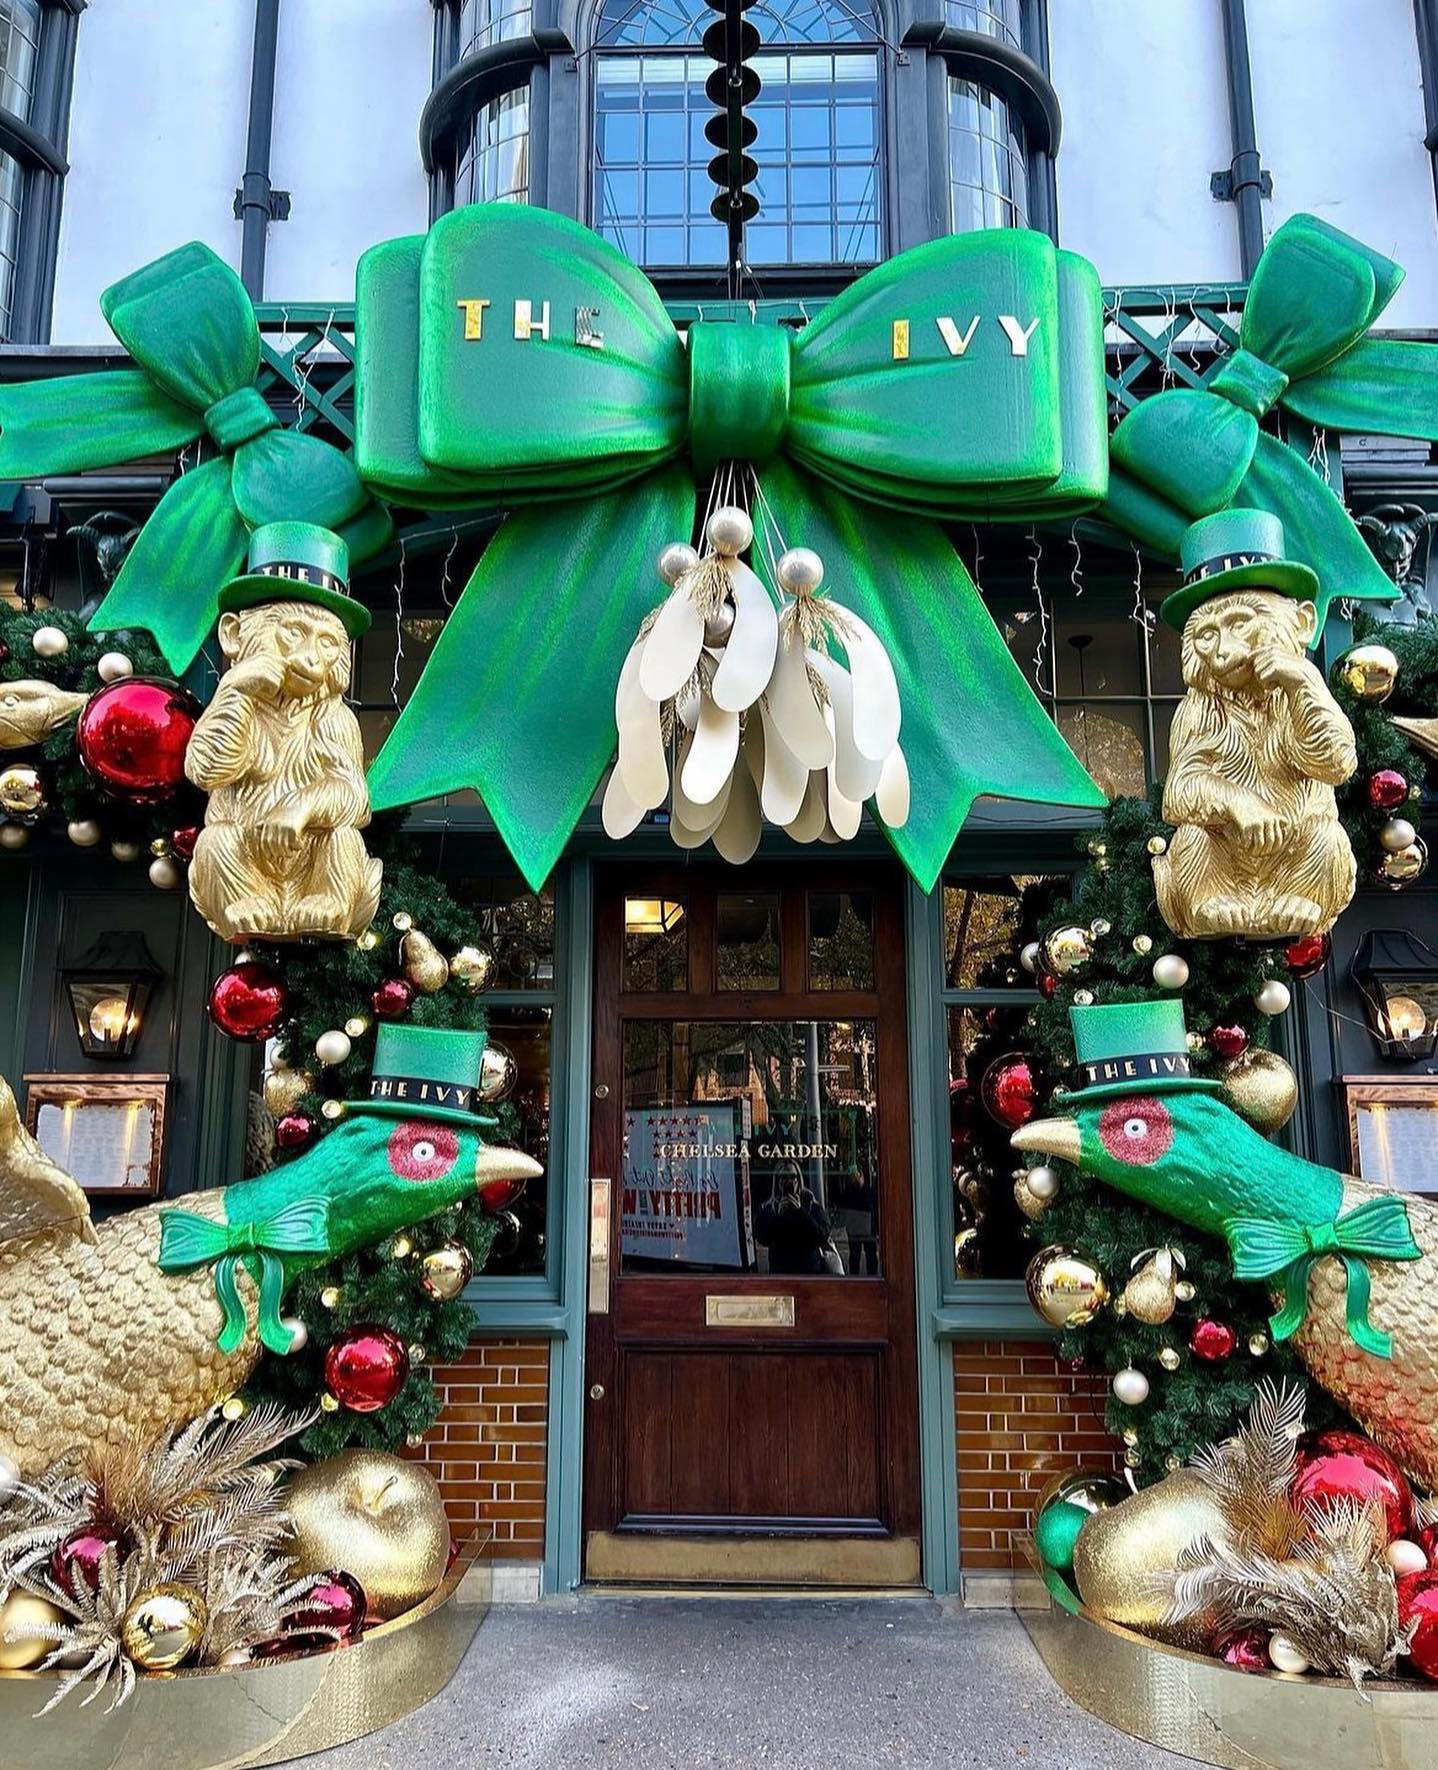 image  1 All Things England - Christmas facade on point at #theivychelseagarden